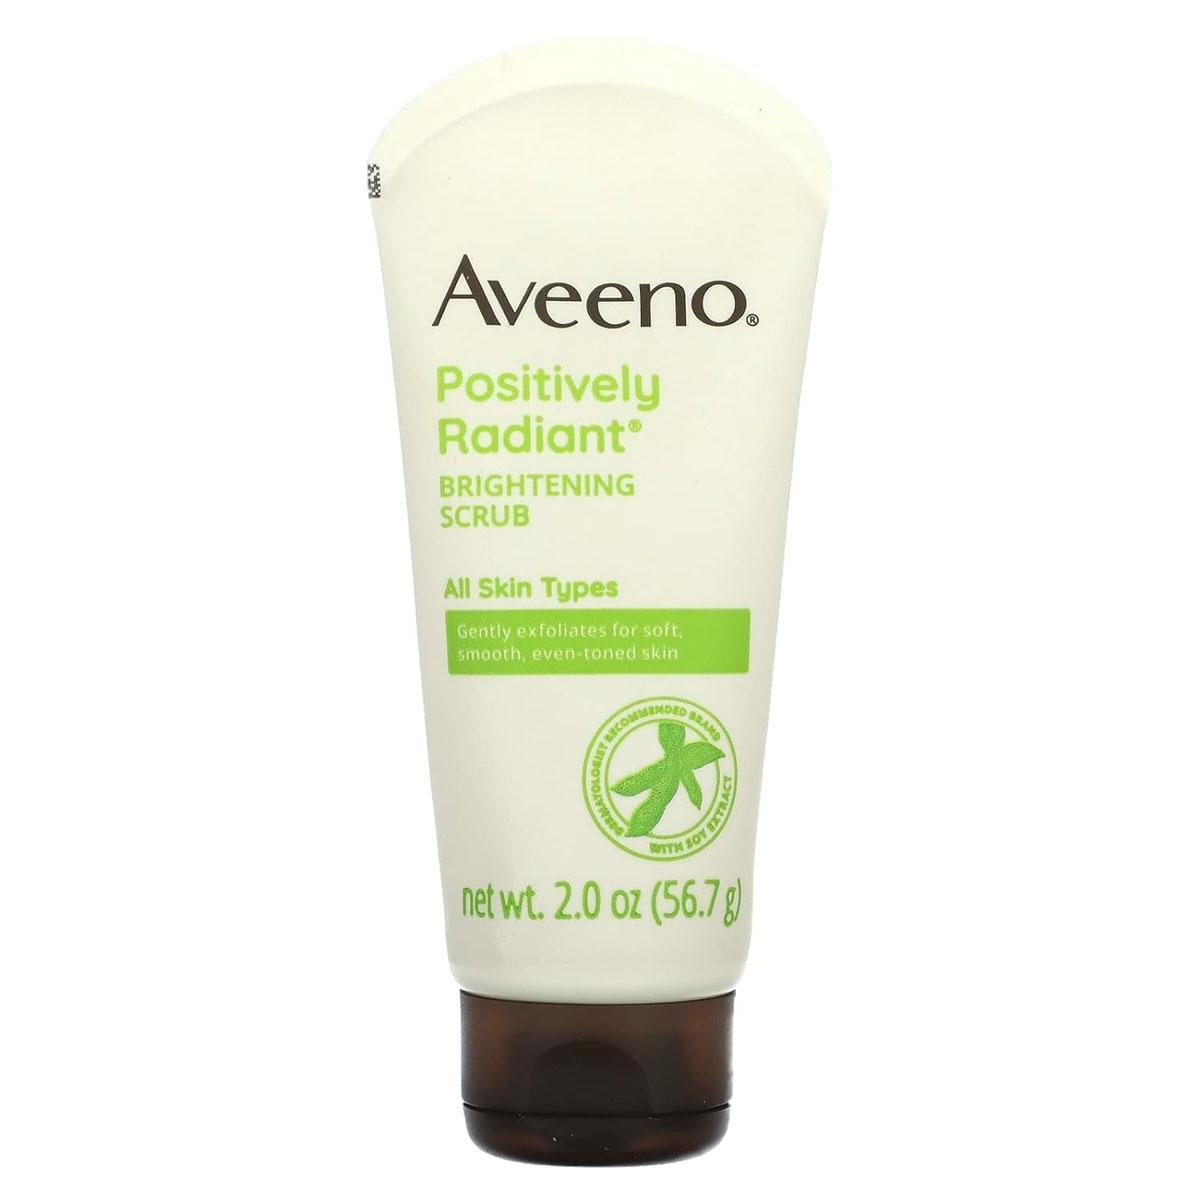 Aveeno Positively Radiant Skin Brightening Exfoliating Daily Facial Scrub for $2.37